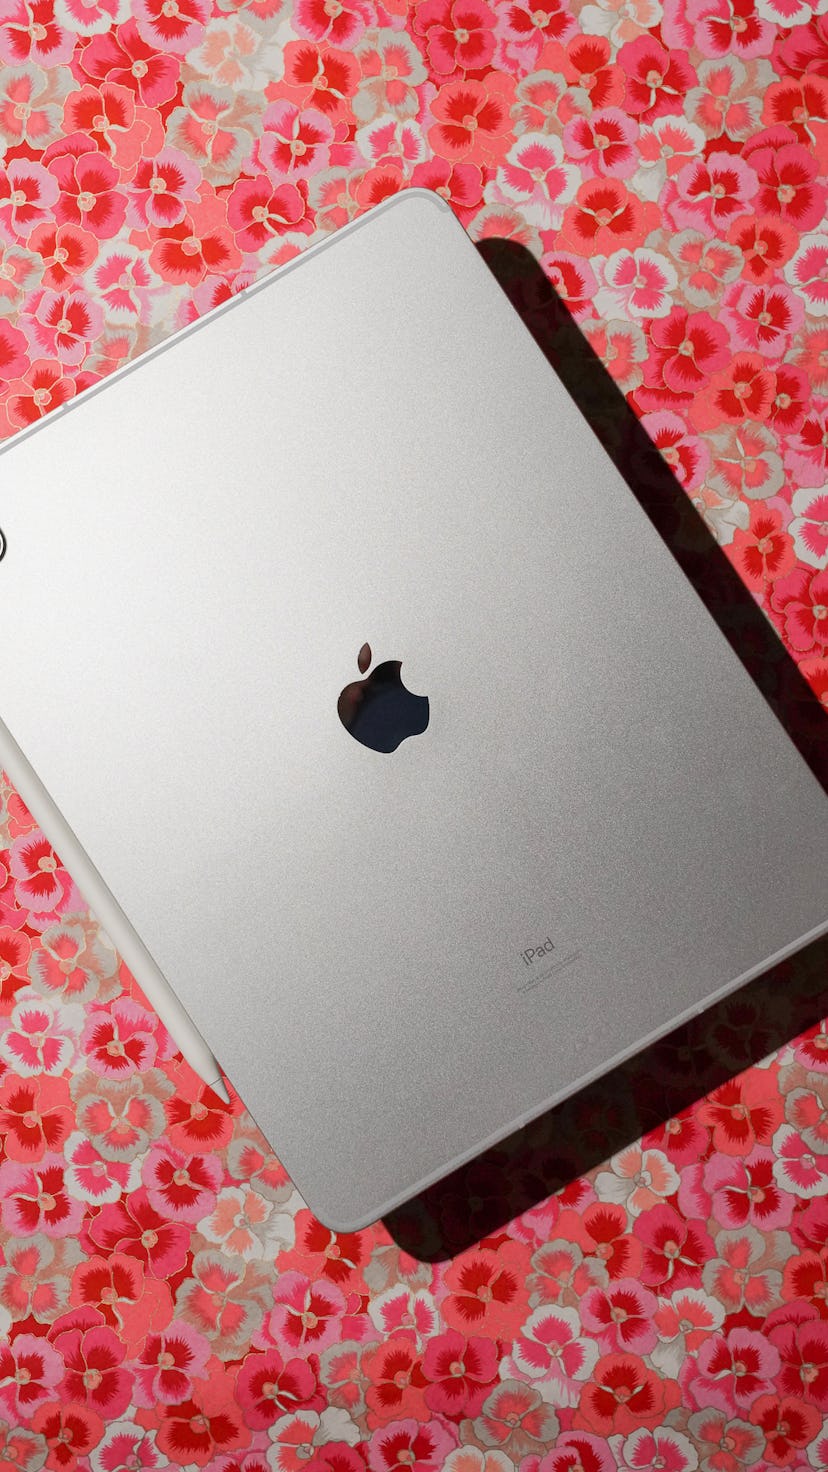 M1 iPad Pro review: The back of the M1 iPad